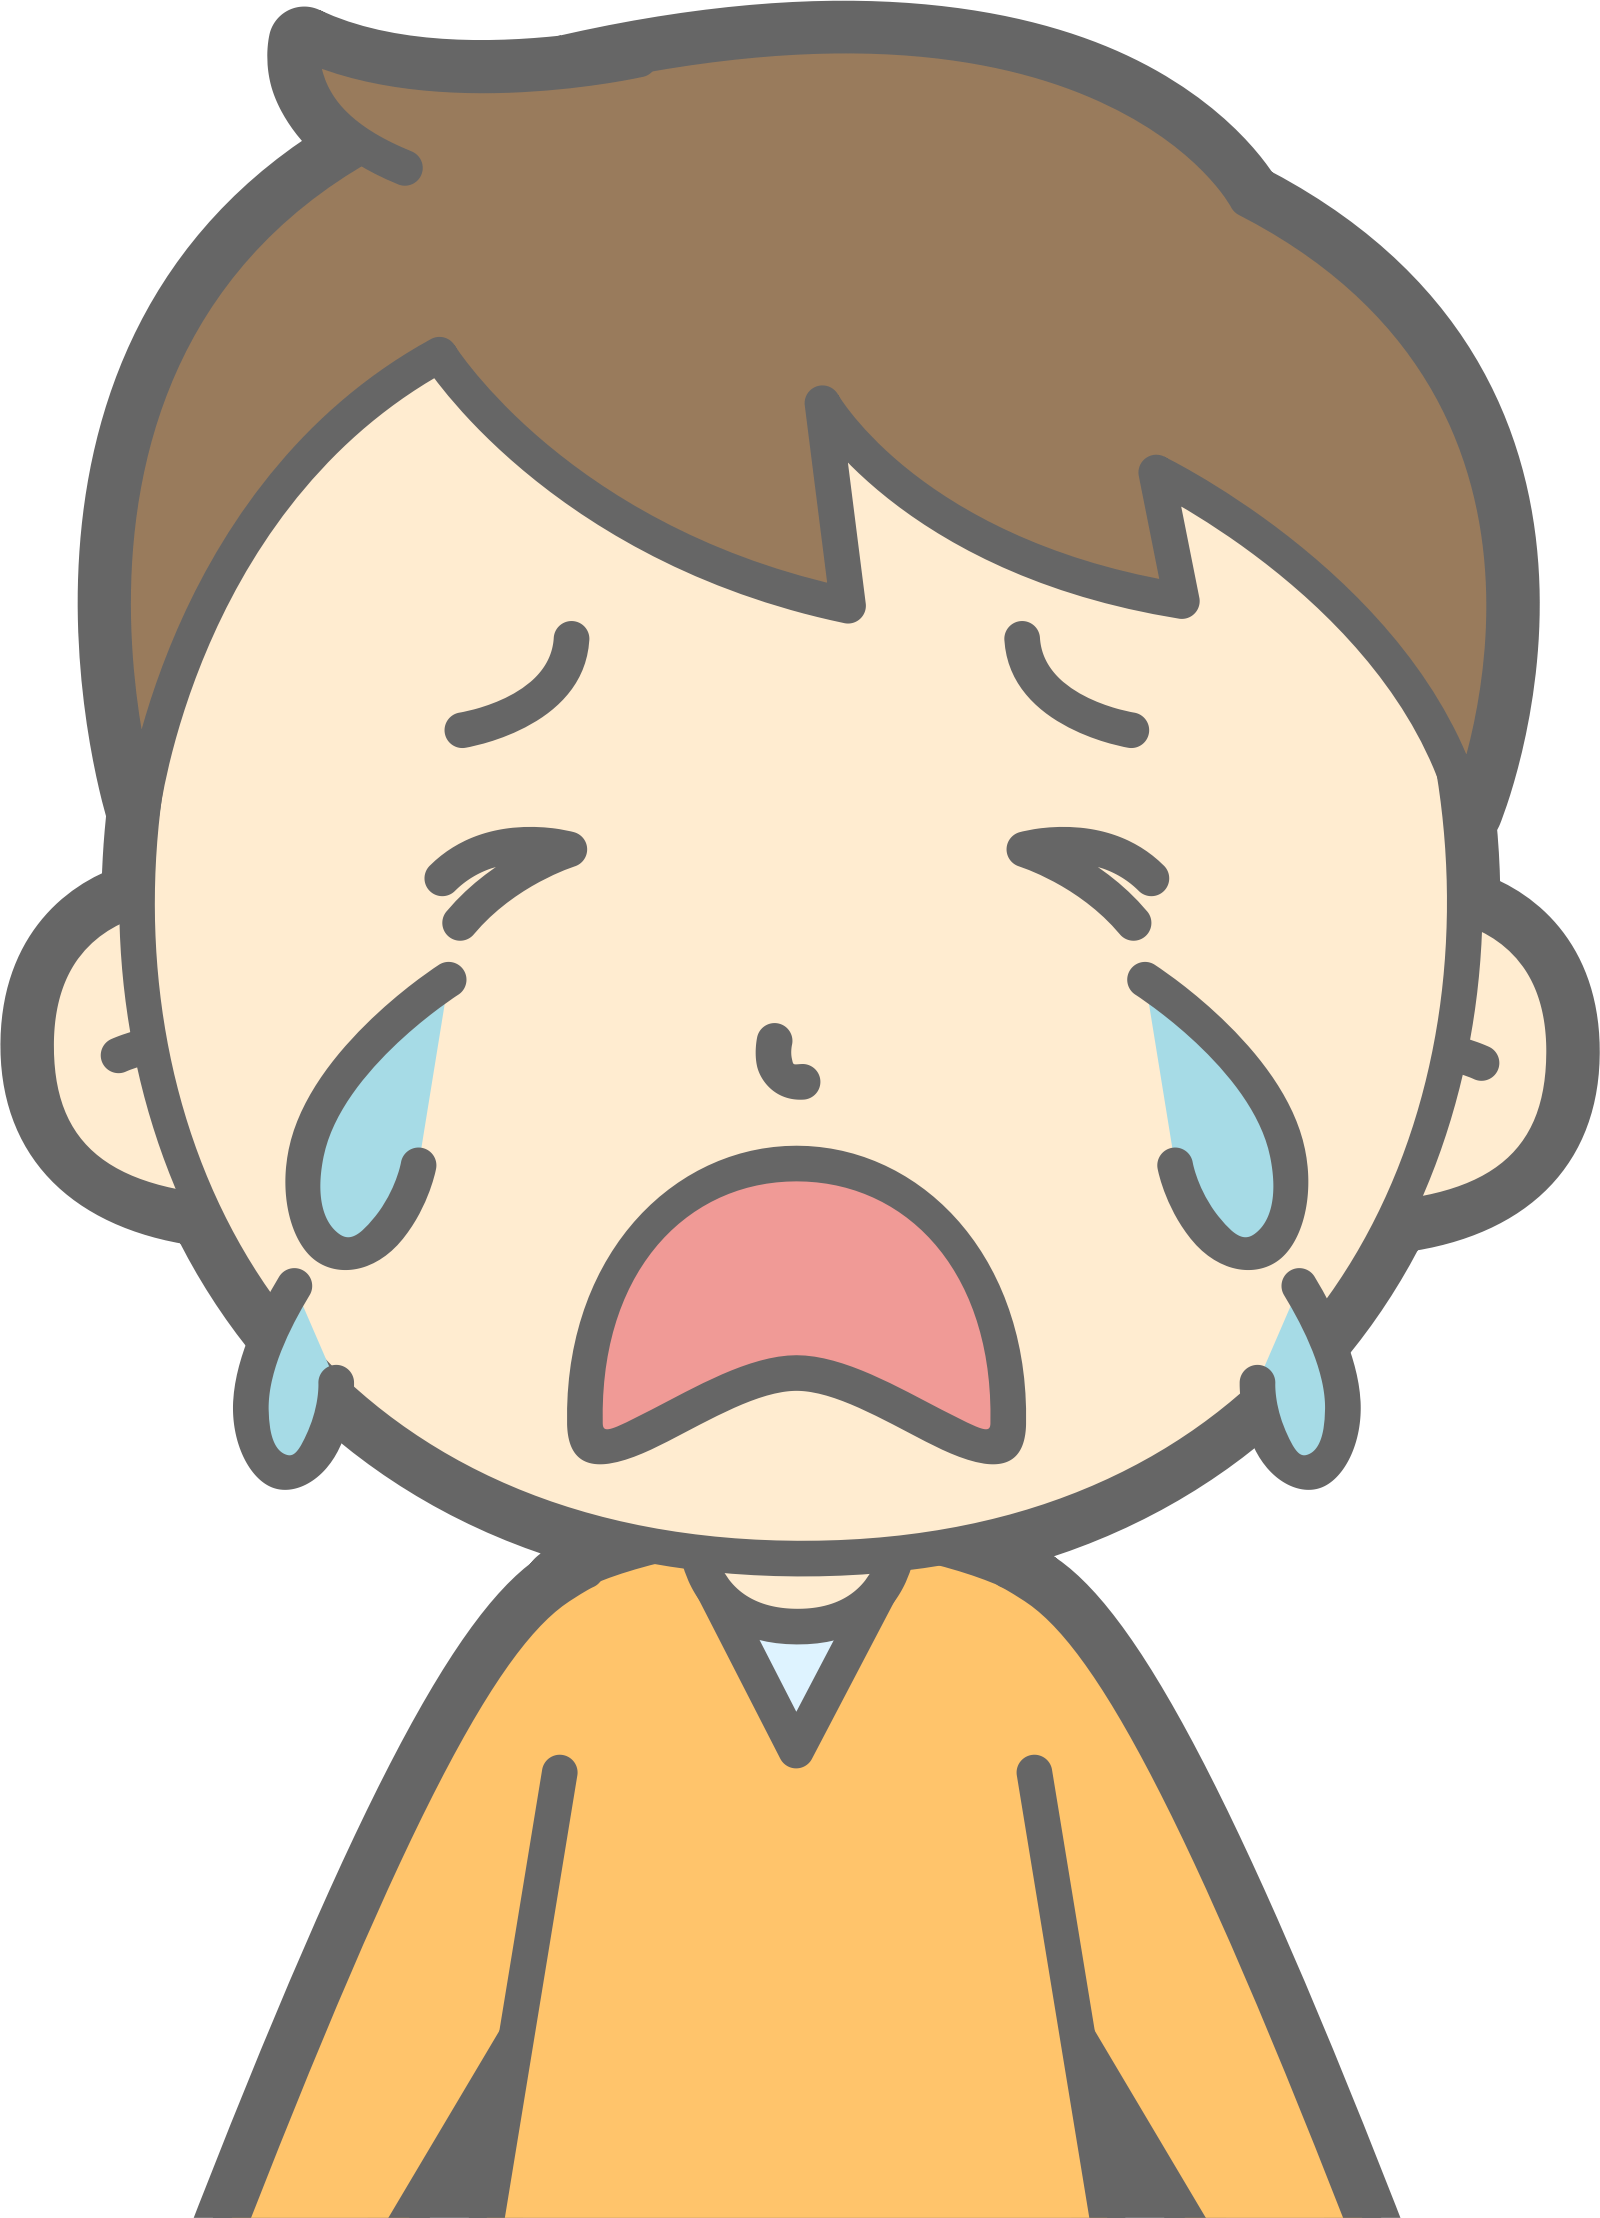 Crying boy icons png. Cry clipart baby cry